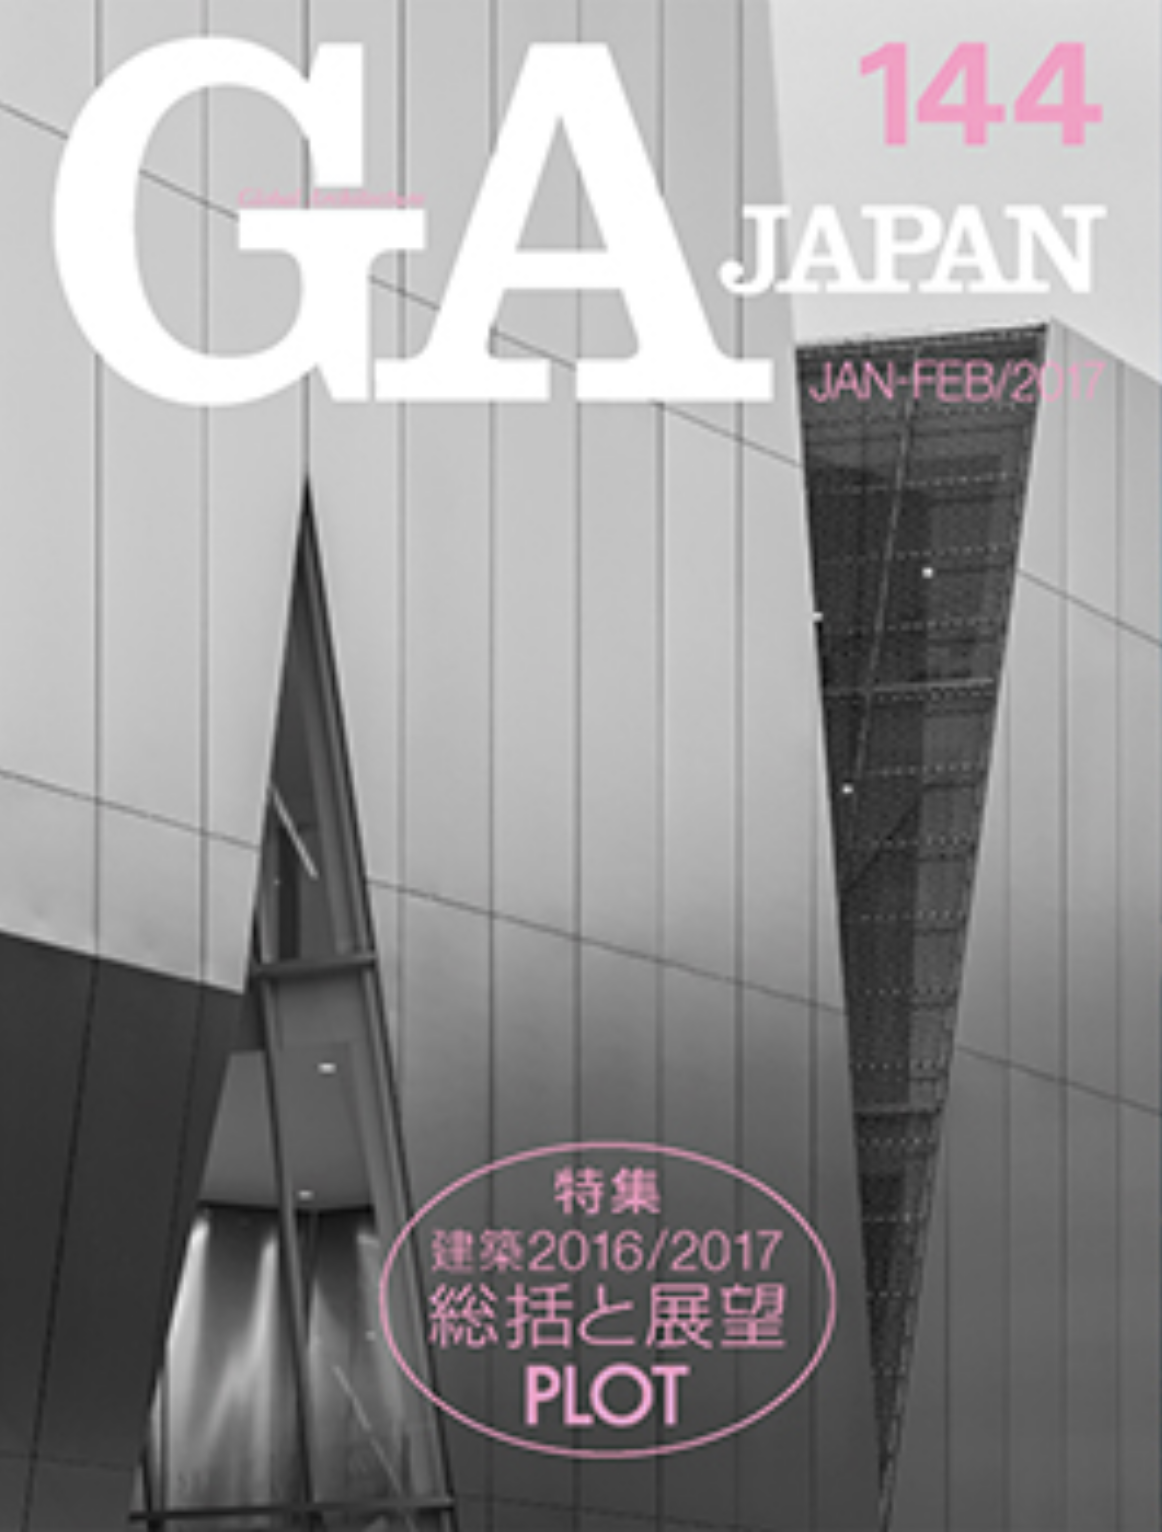 ‘Agri Chapel’ was published in GA JAPAN 144